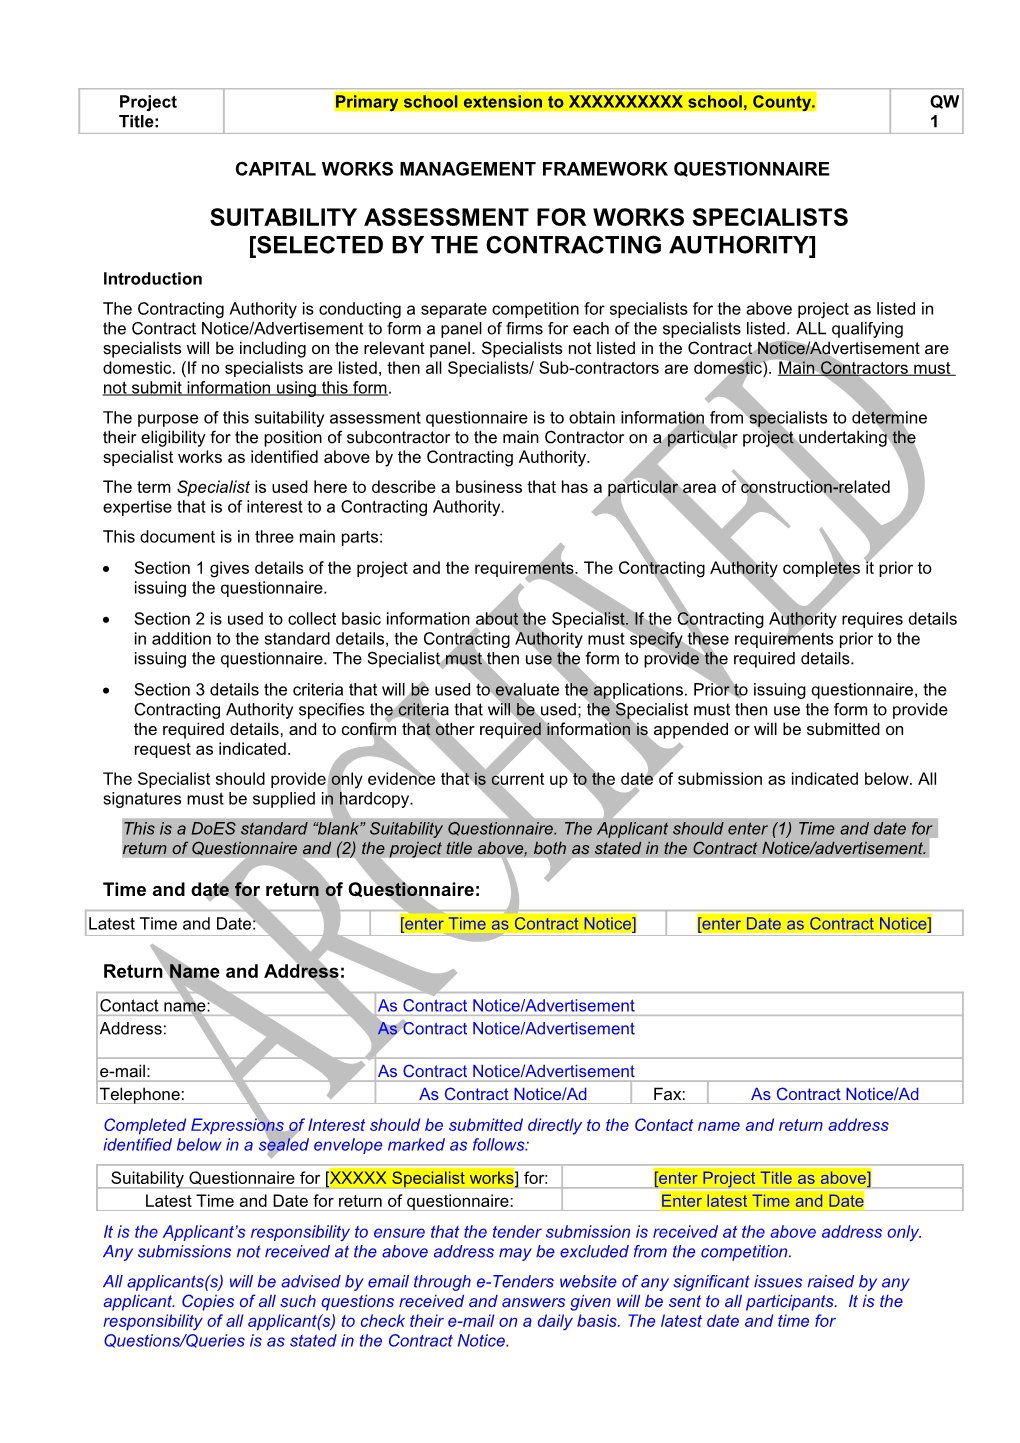 Suitability Assessment Questionnaire for Works Specialists